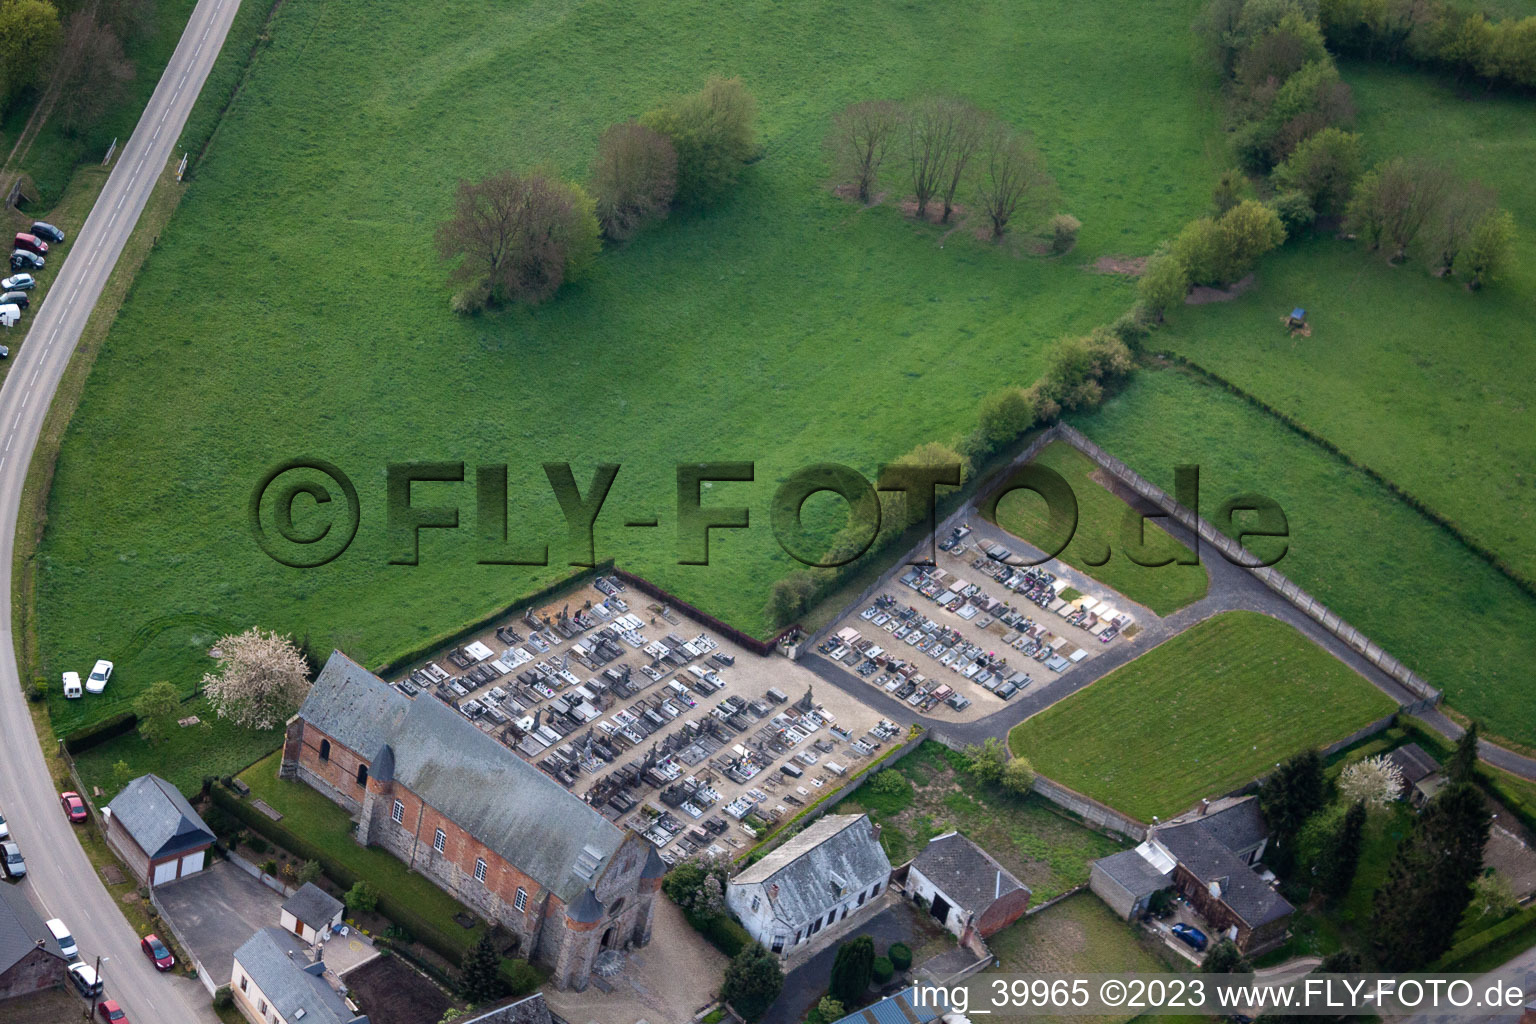 Marly-Gomont in the state Aisne, France out of the air